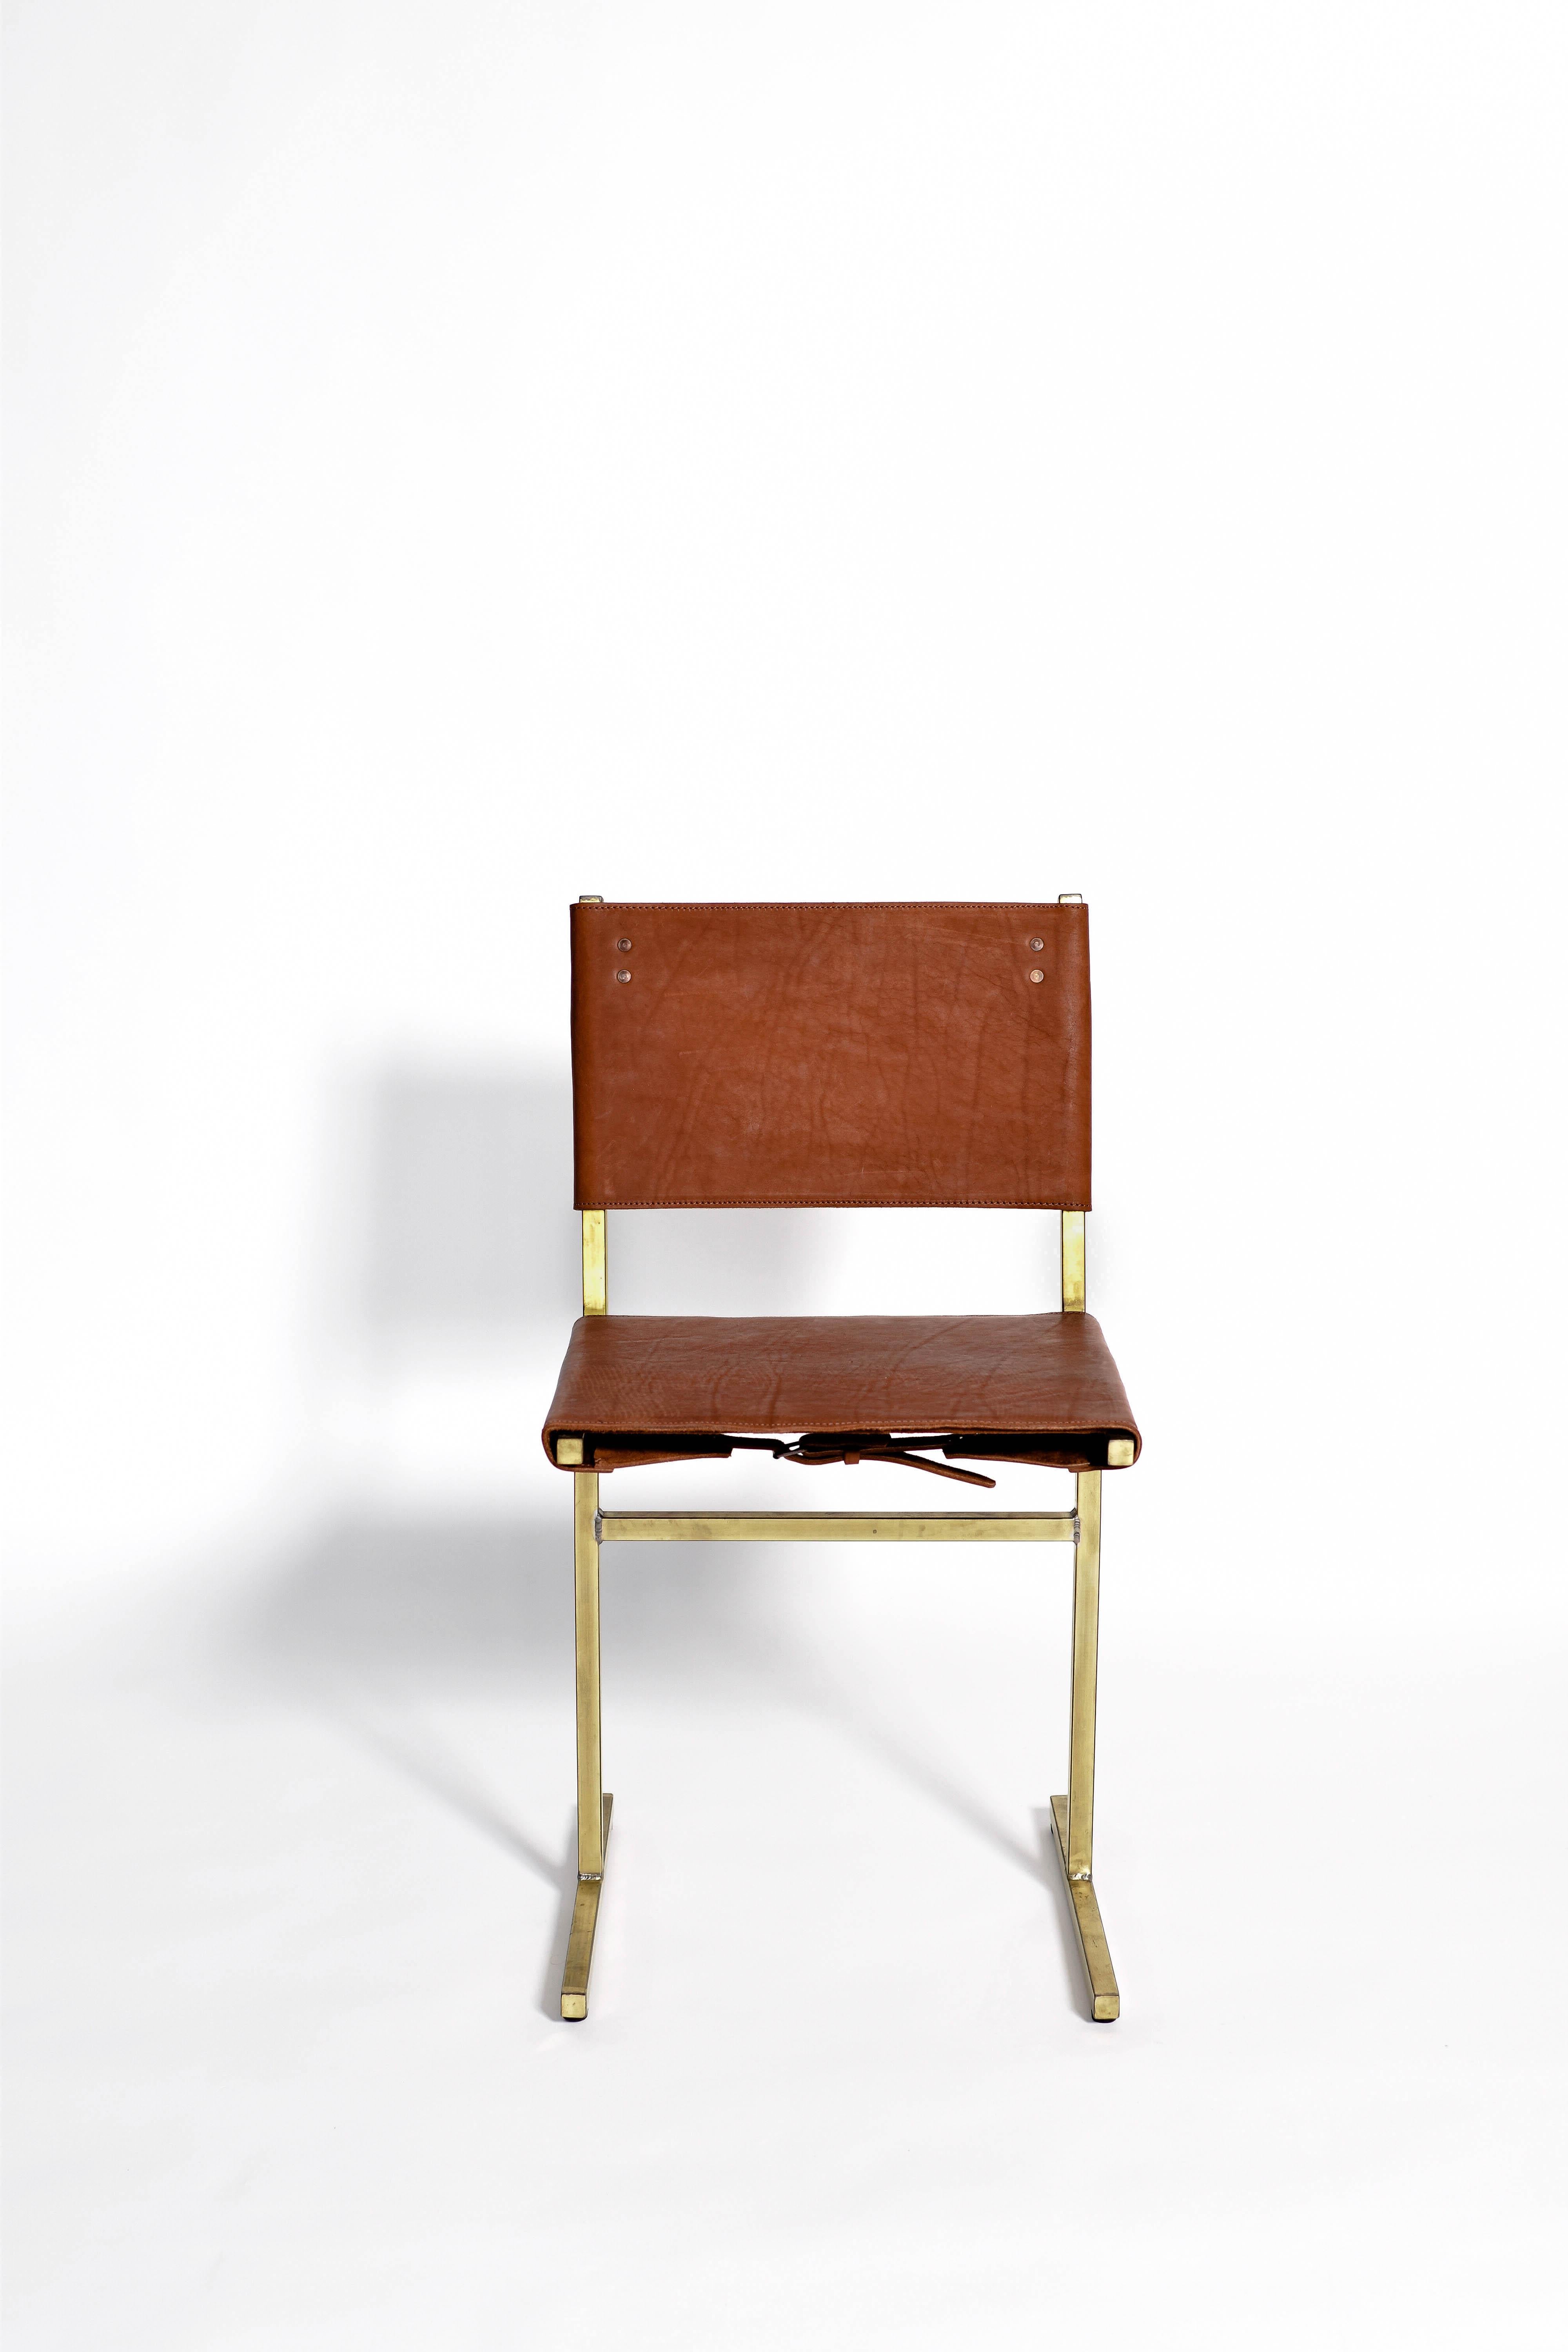 Classic brown and brass memento chair, Jesse Sanderson
Original signed chair by Jesse Sanderson
Materials: Leather, Steel
Dimensions: W 43 x D 50 x H 80 cm 
 Seating height: 47 cm

  

Five lines and a circle – the human body can be as